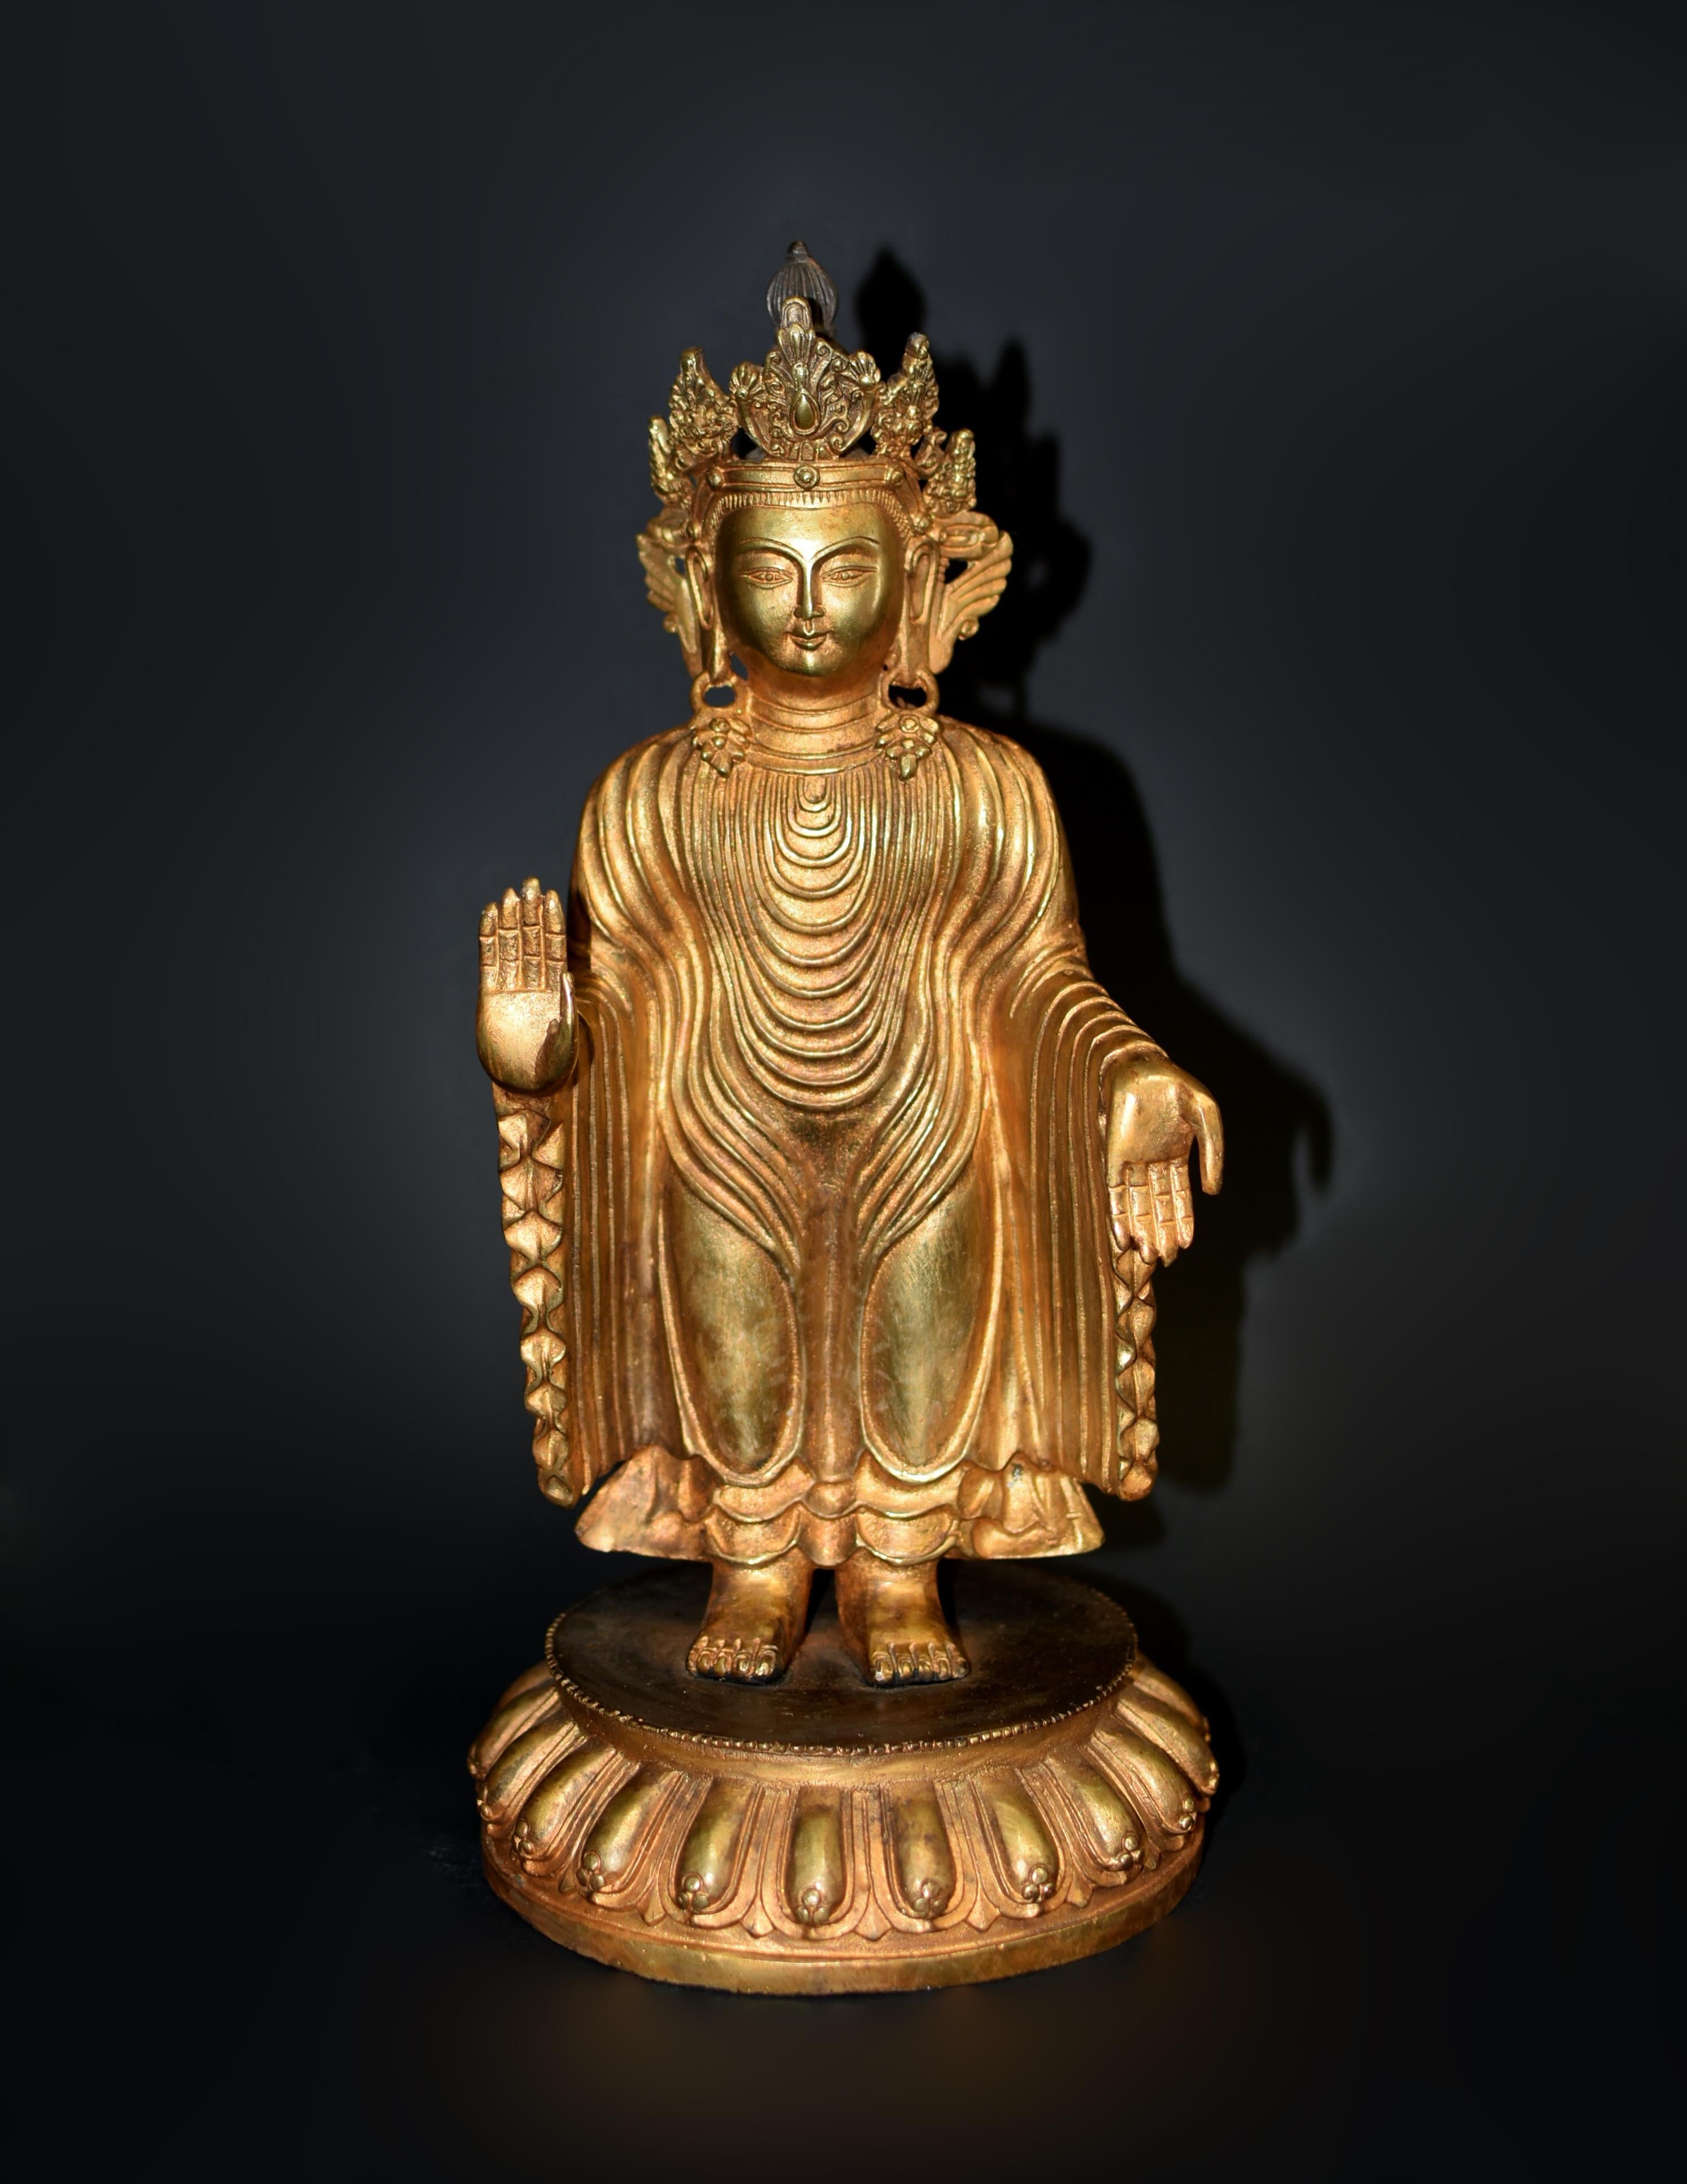 A magnificent gilt bronze statue of Tibetan Buddha Udanaya. Poised upon a large lotus plinth, the Buddha is depicted in the 